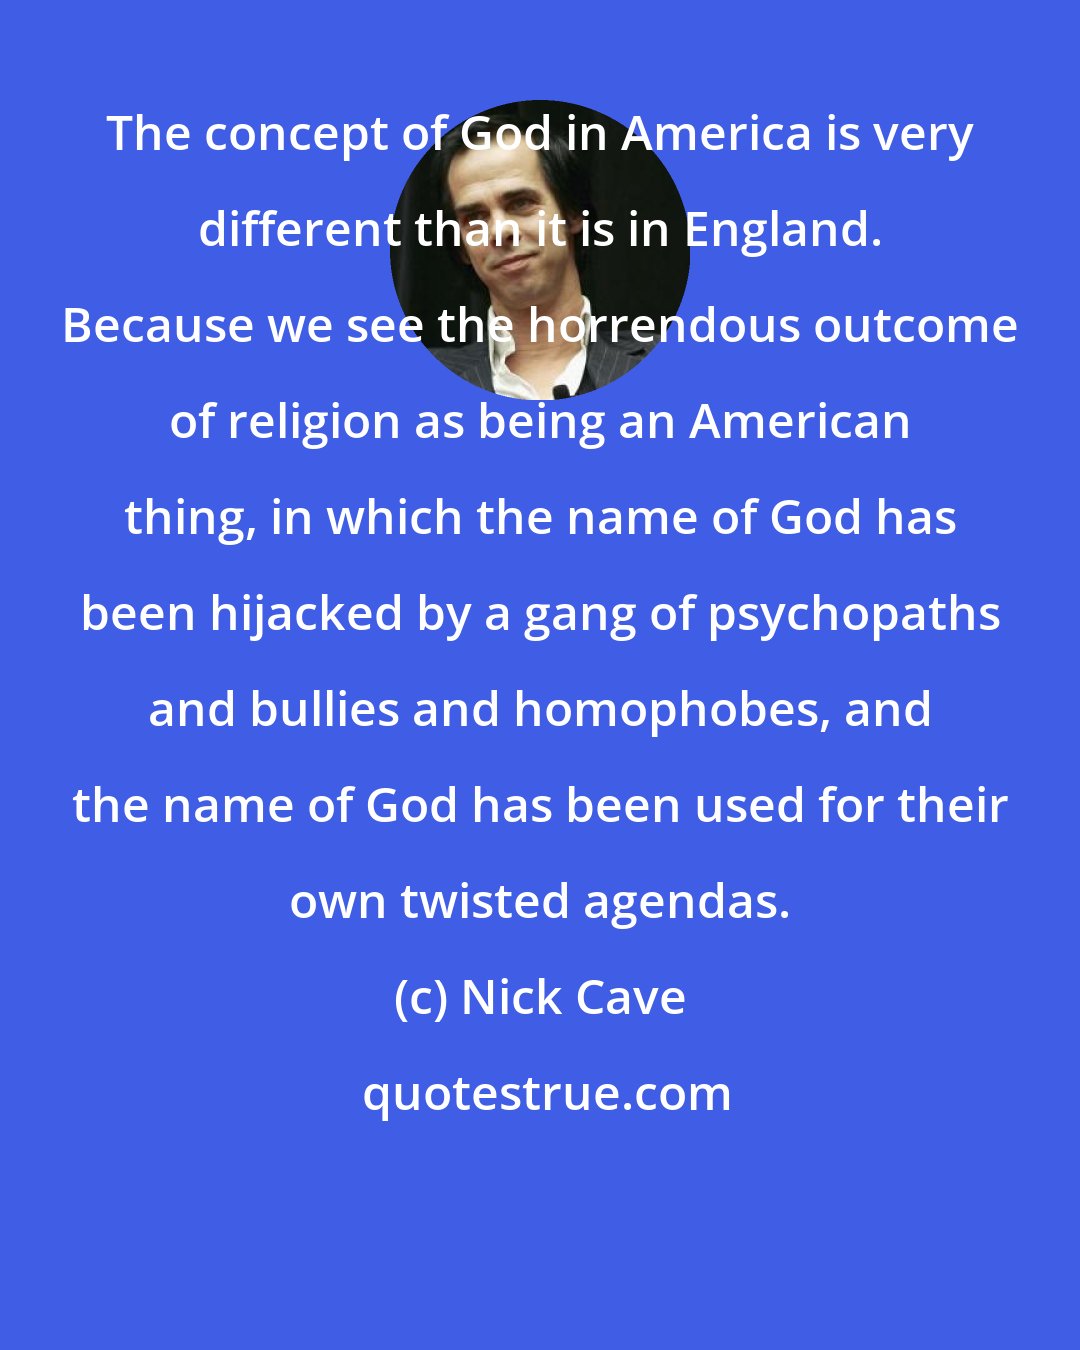 Nick Cave: The concept of God in America is very different than it is in England. Because we see the horrendous outcome of religion as being an American thing, in which the name of God has been hijacked by a gang of psychopaths and bullies and homophobes, and the name of God has been used for their own twisted agendas.